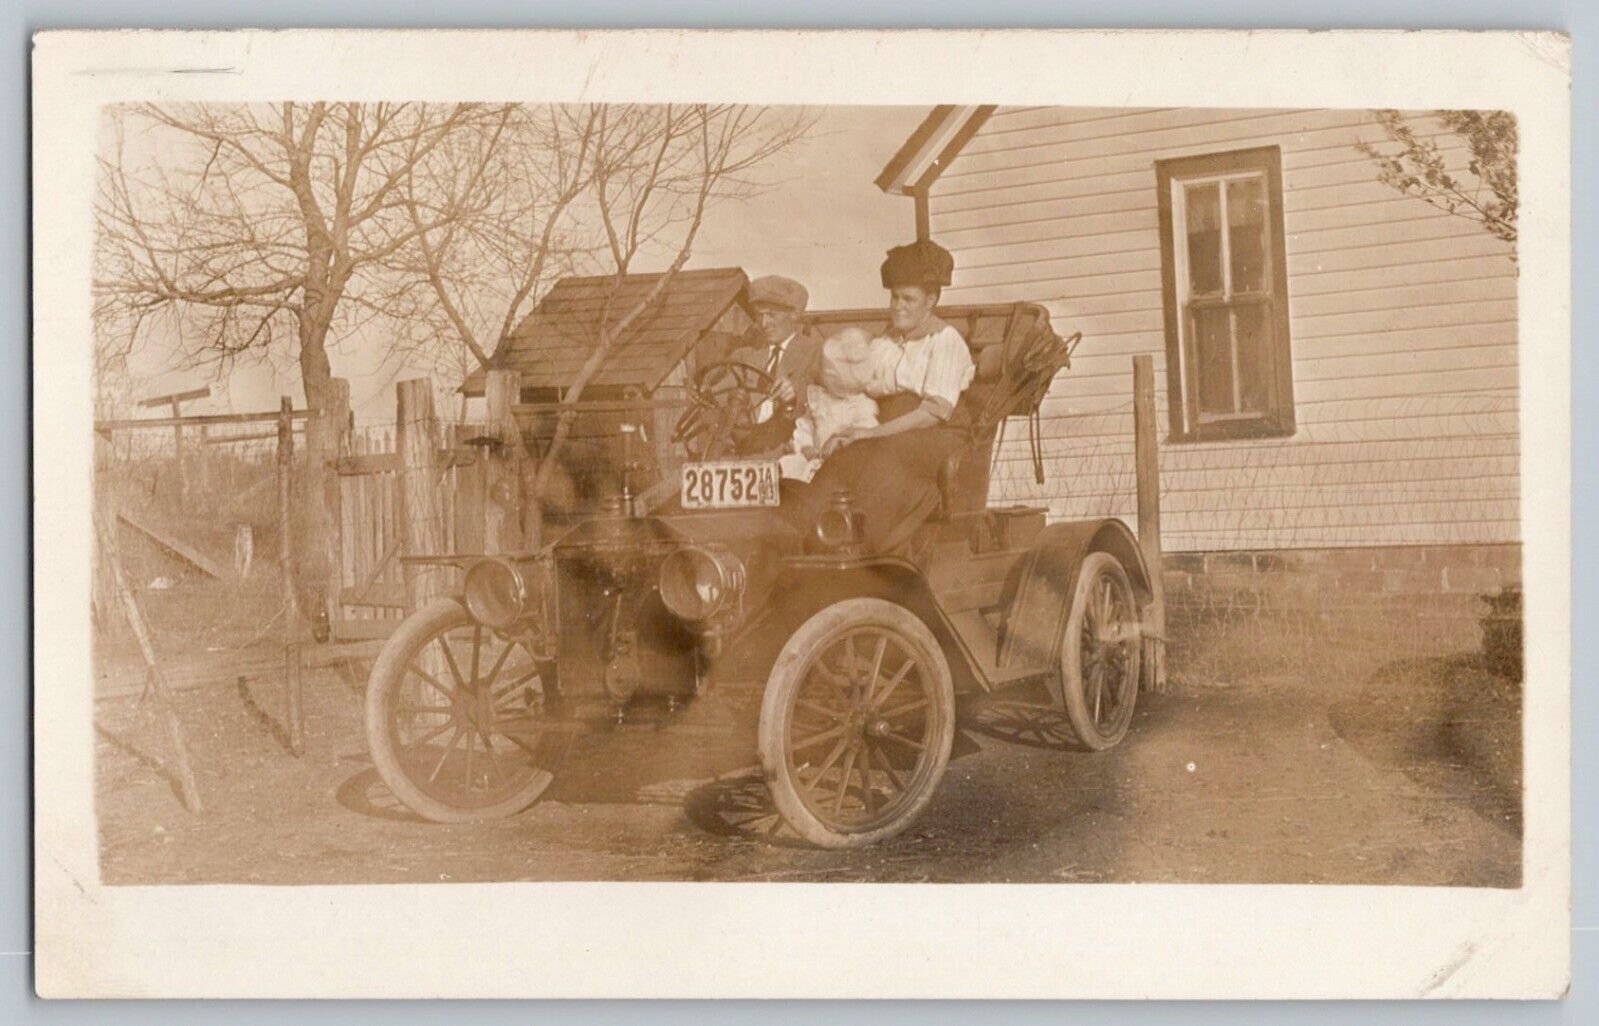 Family In Car With 1913 Iowa License Plate Real Photo Postcard RPPC 